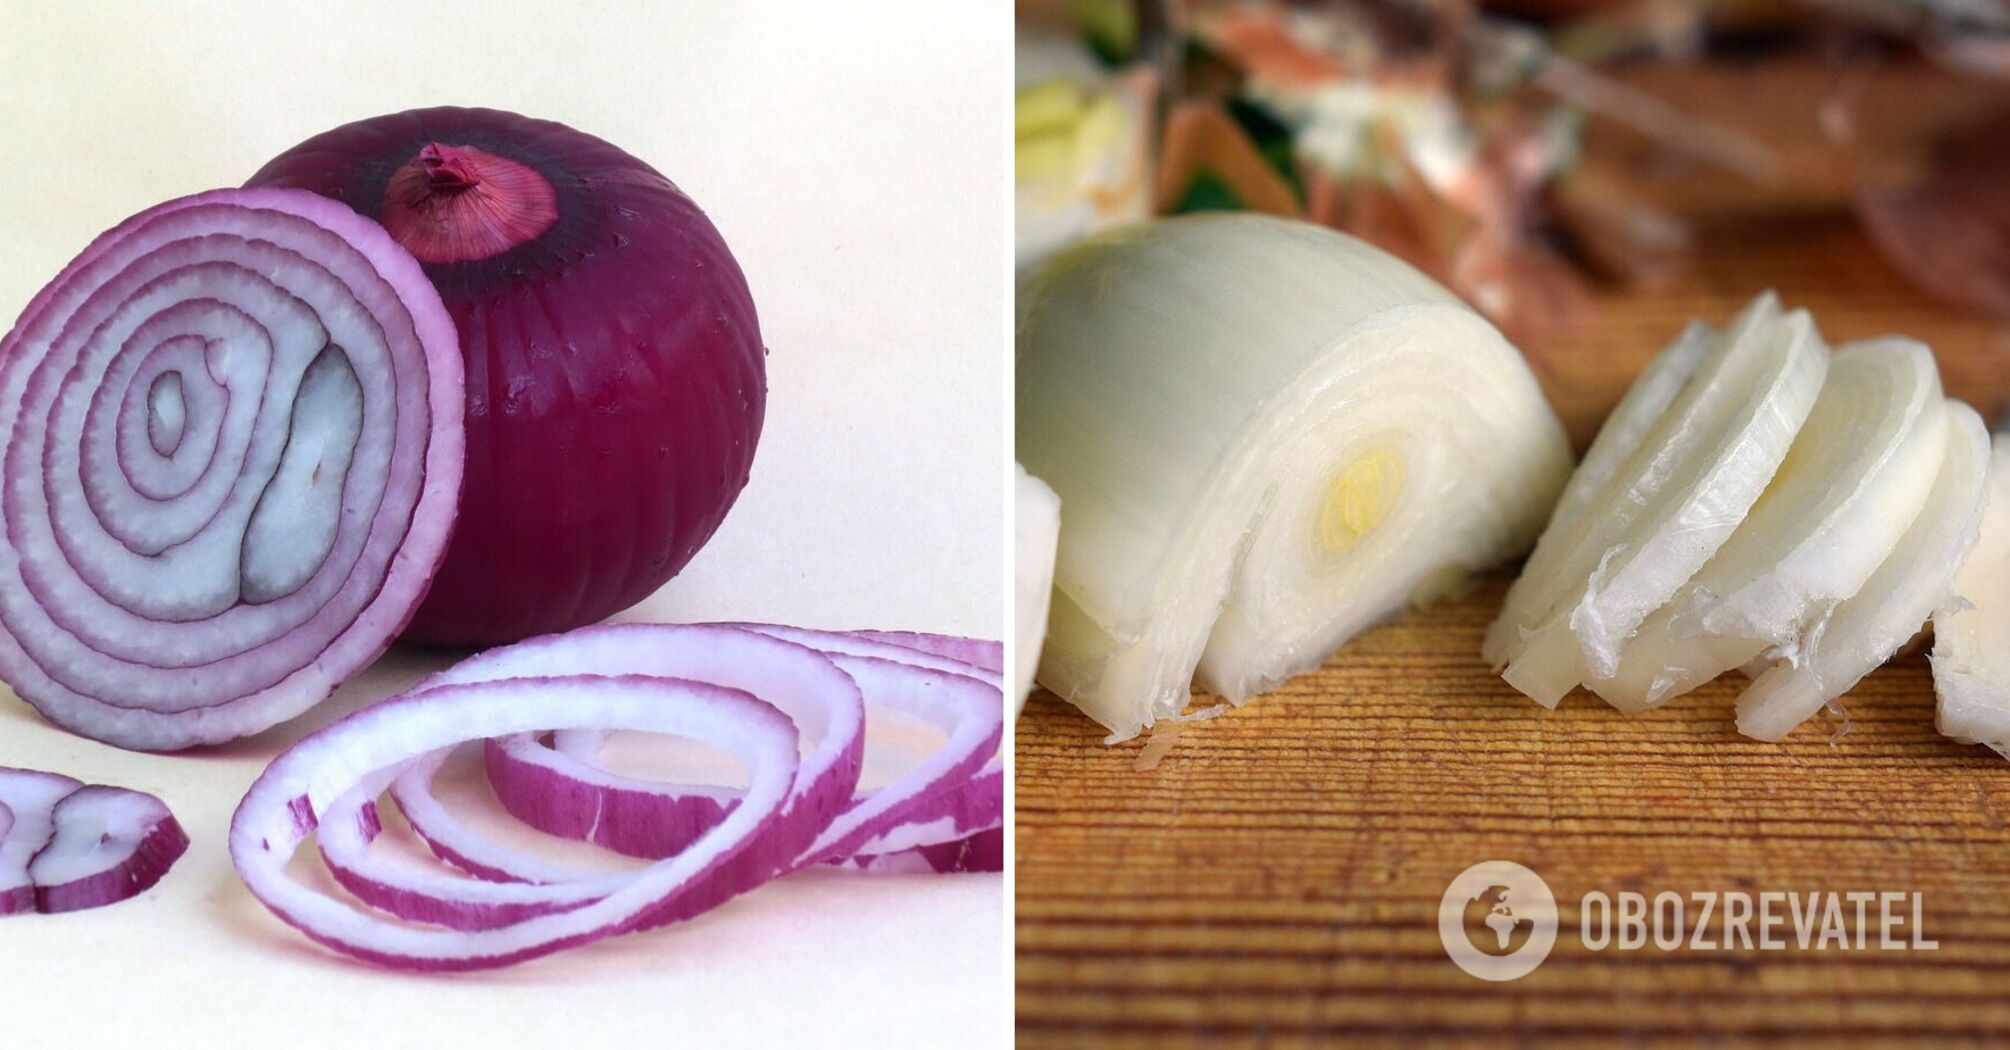 How to cut onions quickly